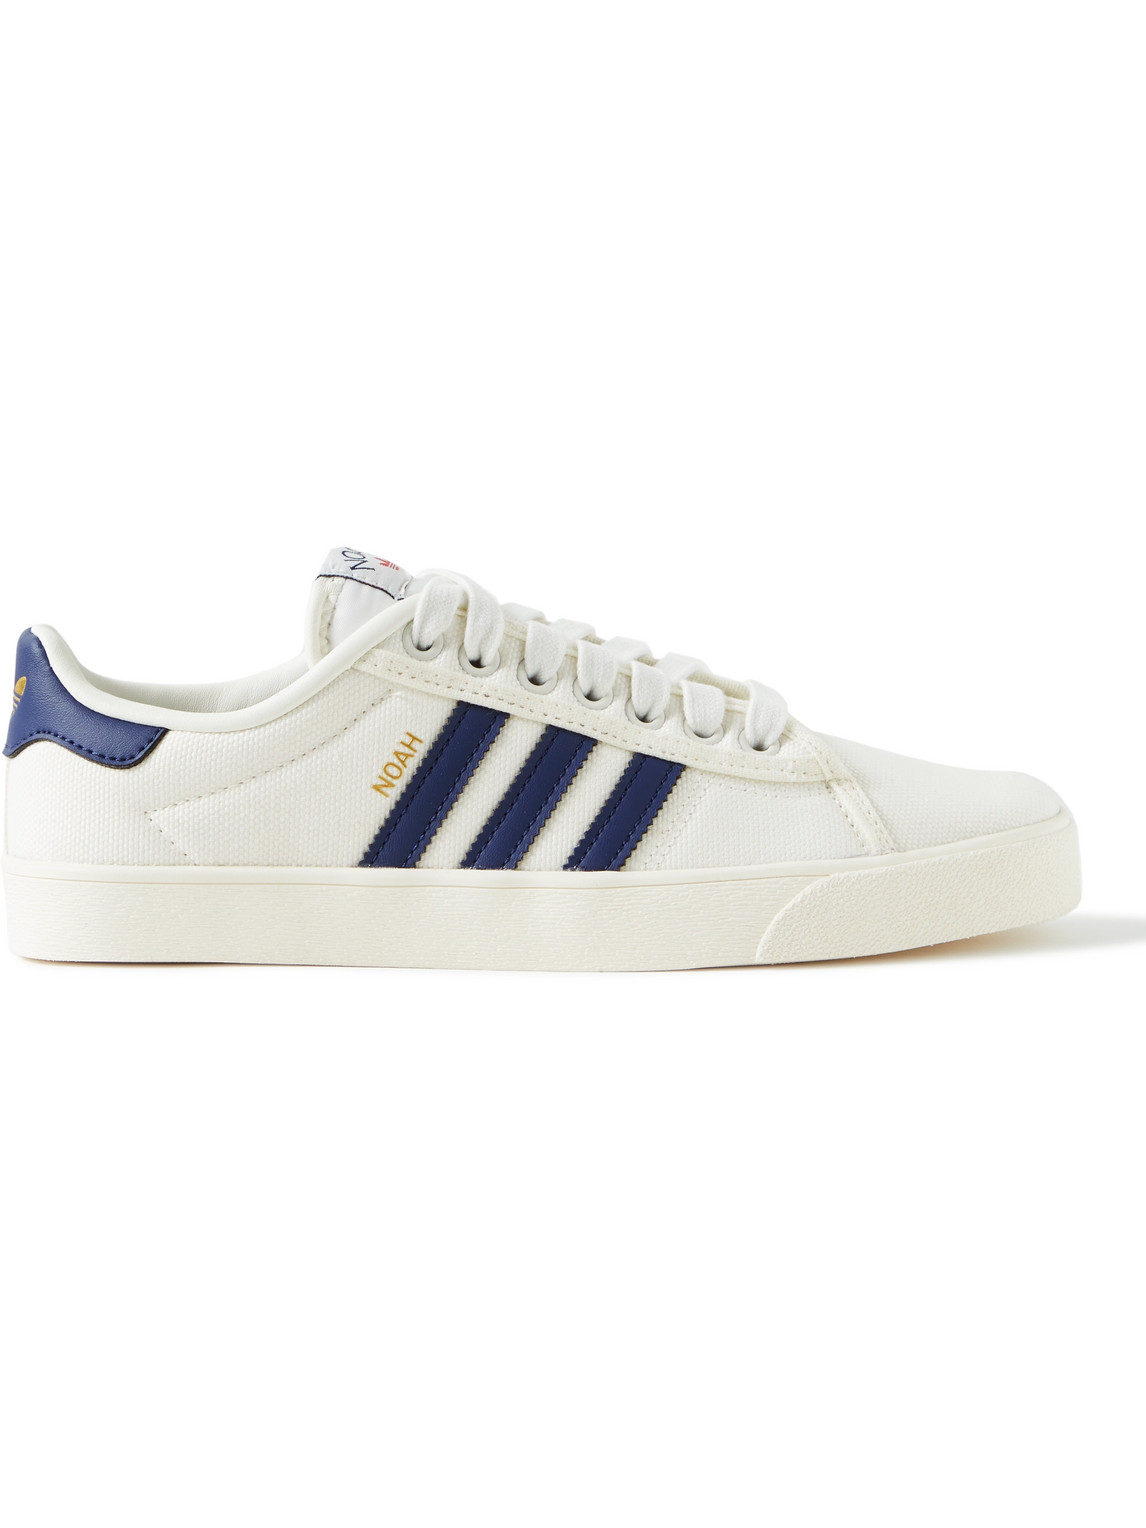 Adidas Consortium Noah Adria Leather-trimmed Canvas Sneakers In White